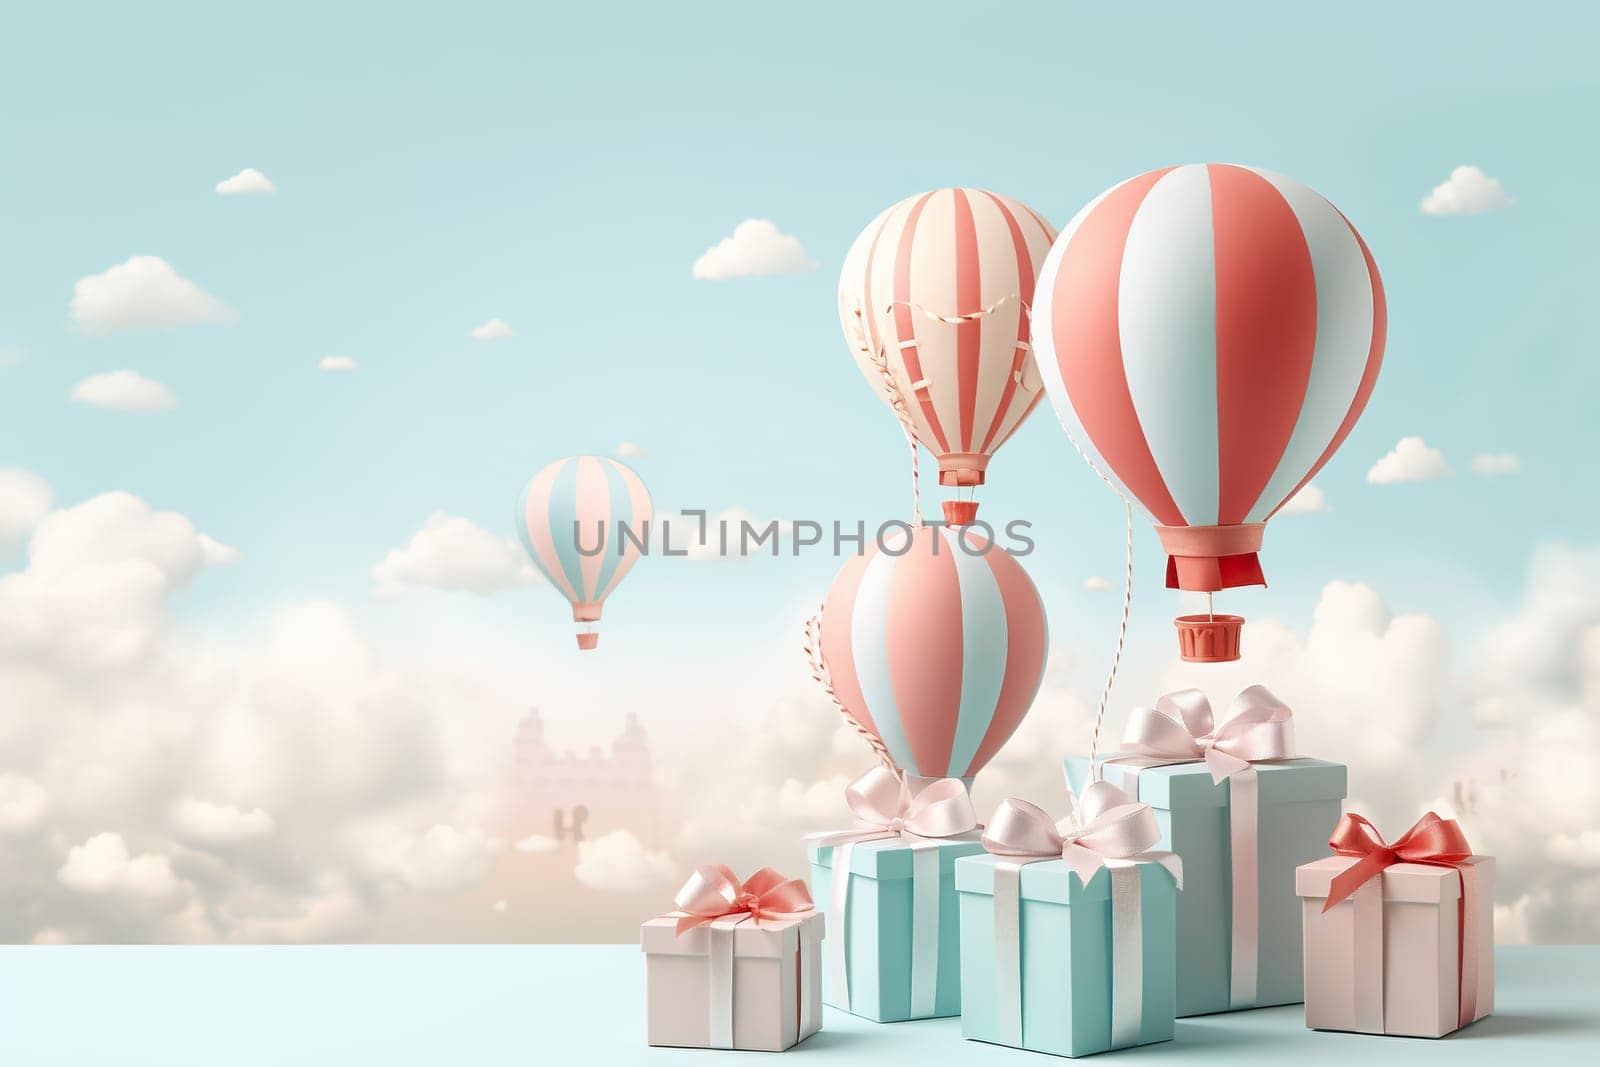 Congratulatory background with balloons, gifts against the background of the sky with clouds. Design of greeting background, cards for Birthday, Valentine's Day. by Vovmar